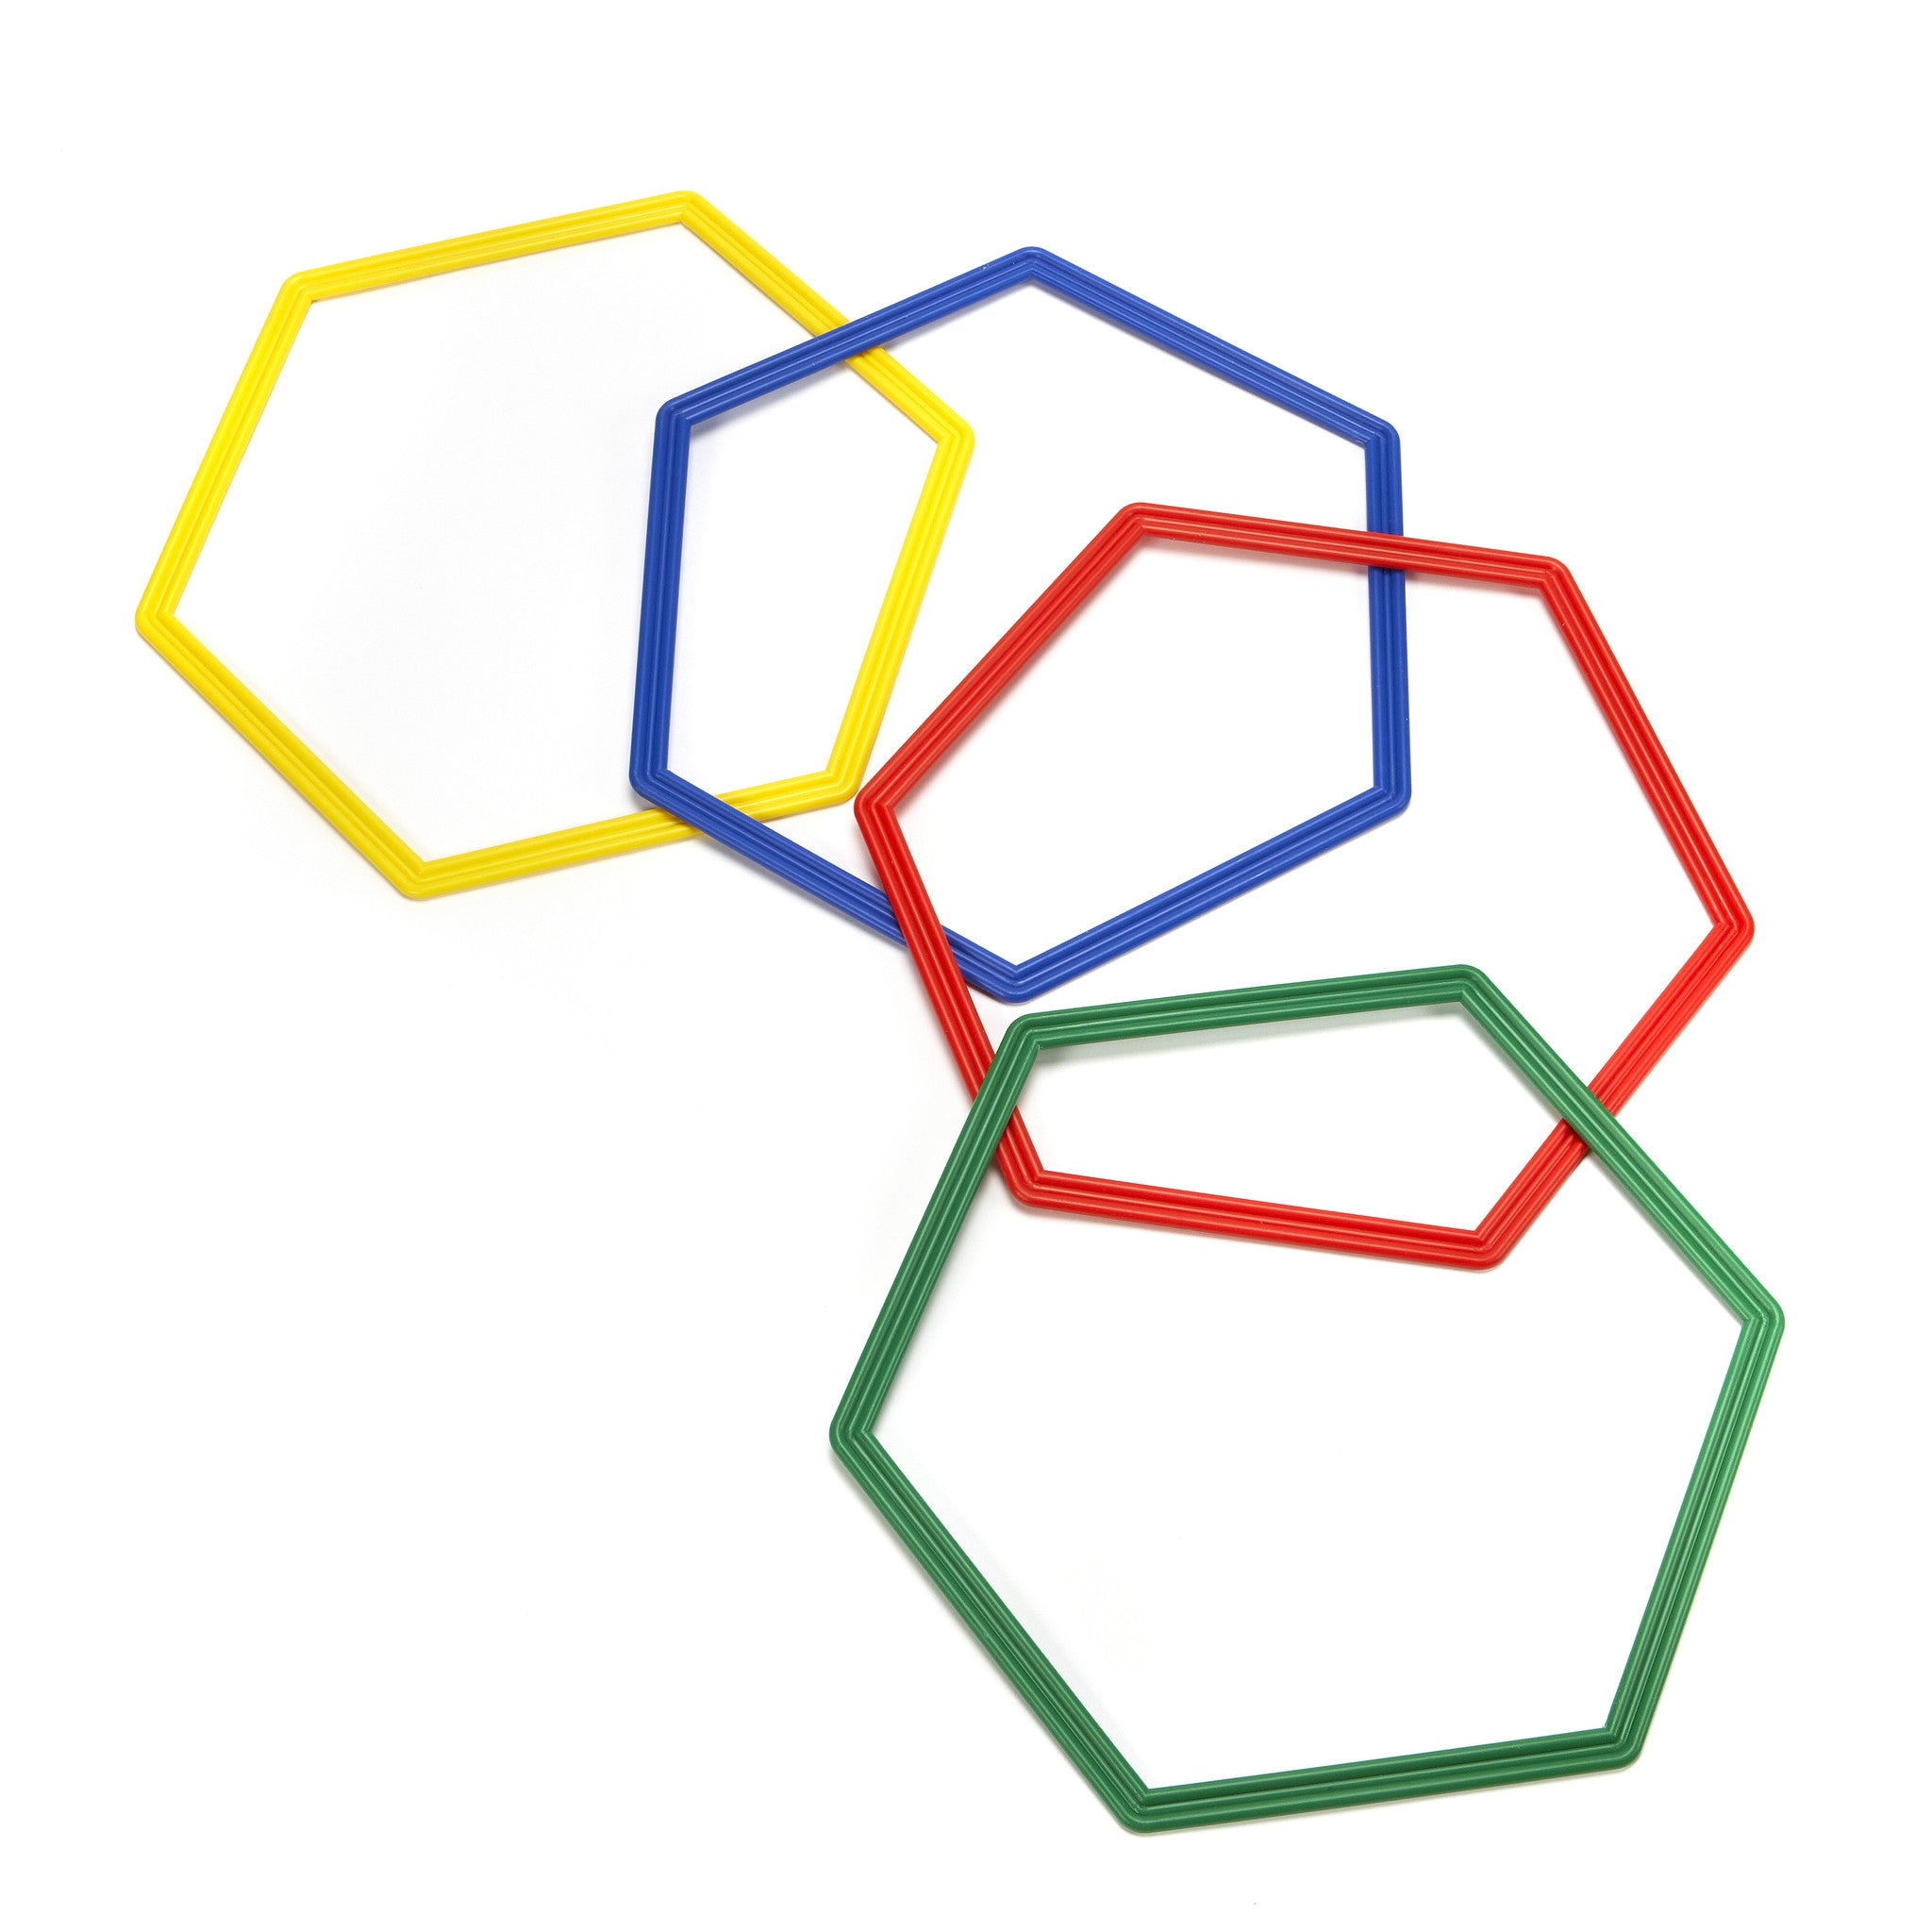 Four flat hexagon-shaped hoops. Hexahoops in blue, red, yellow and green.